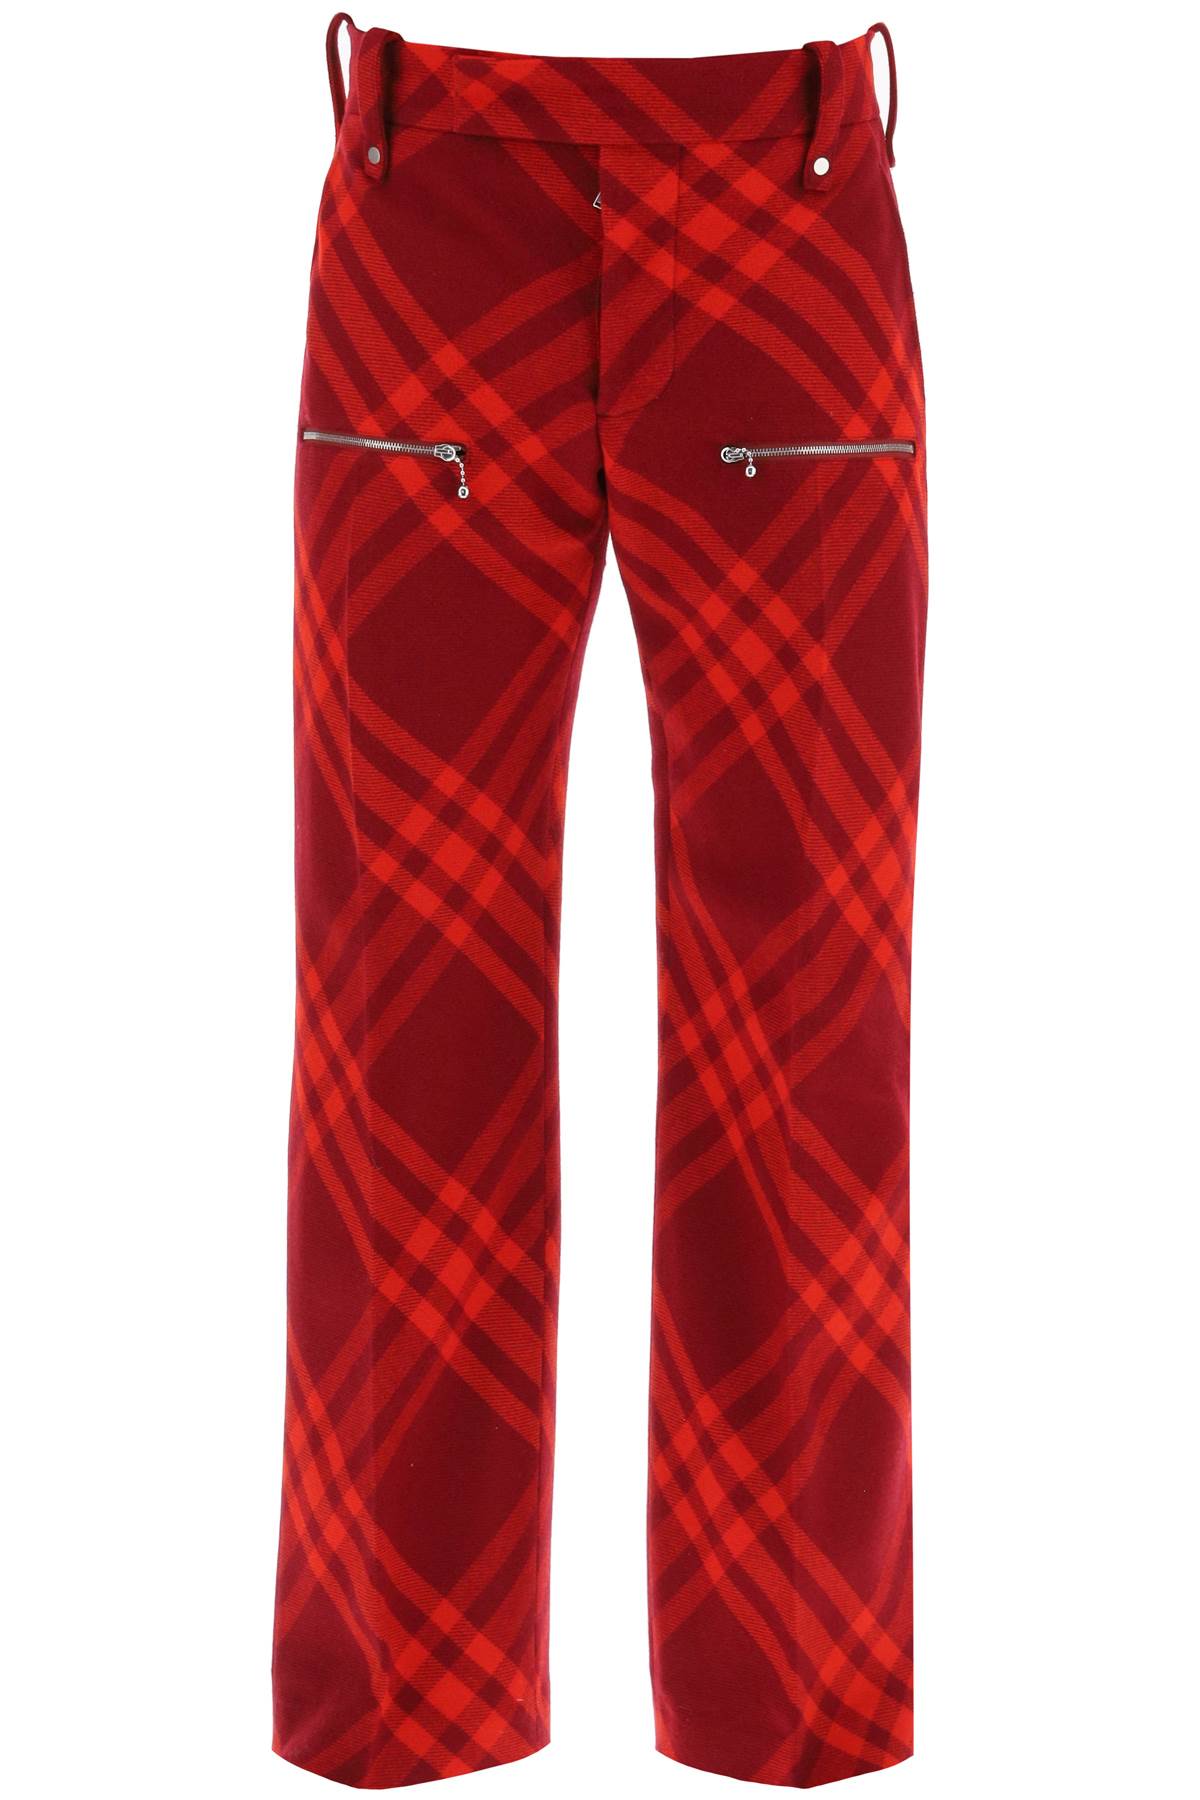 Shop Burberry Men's Iconic Red Check Wool Pants For The Fall/winter Season